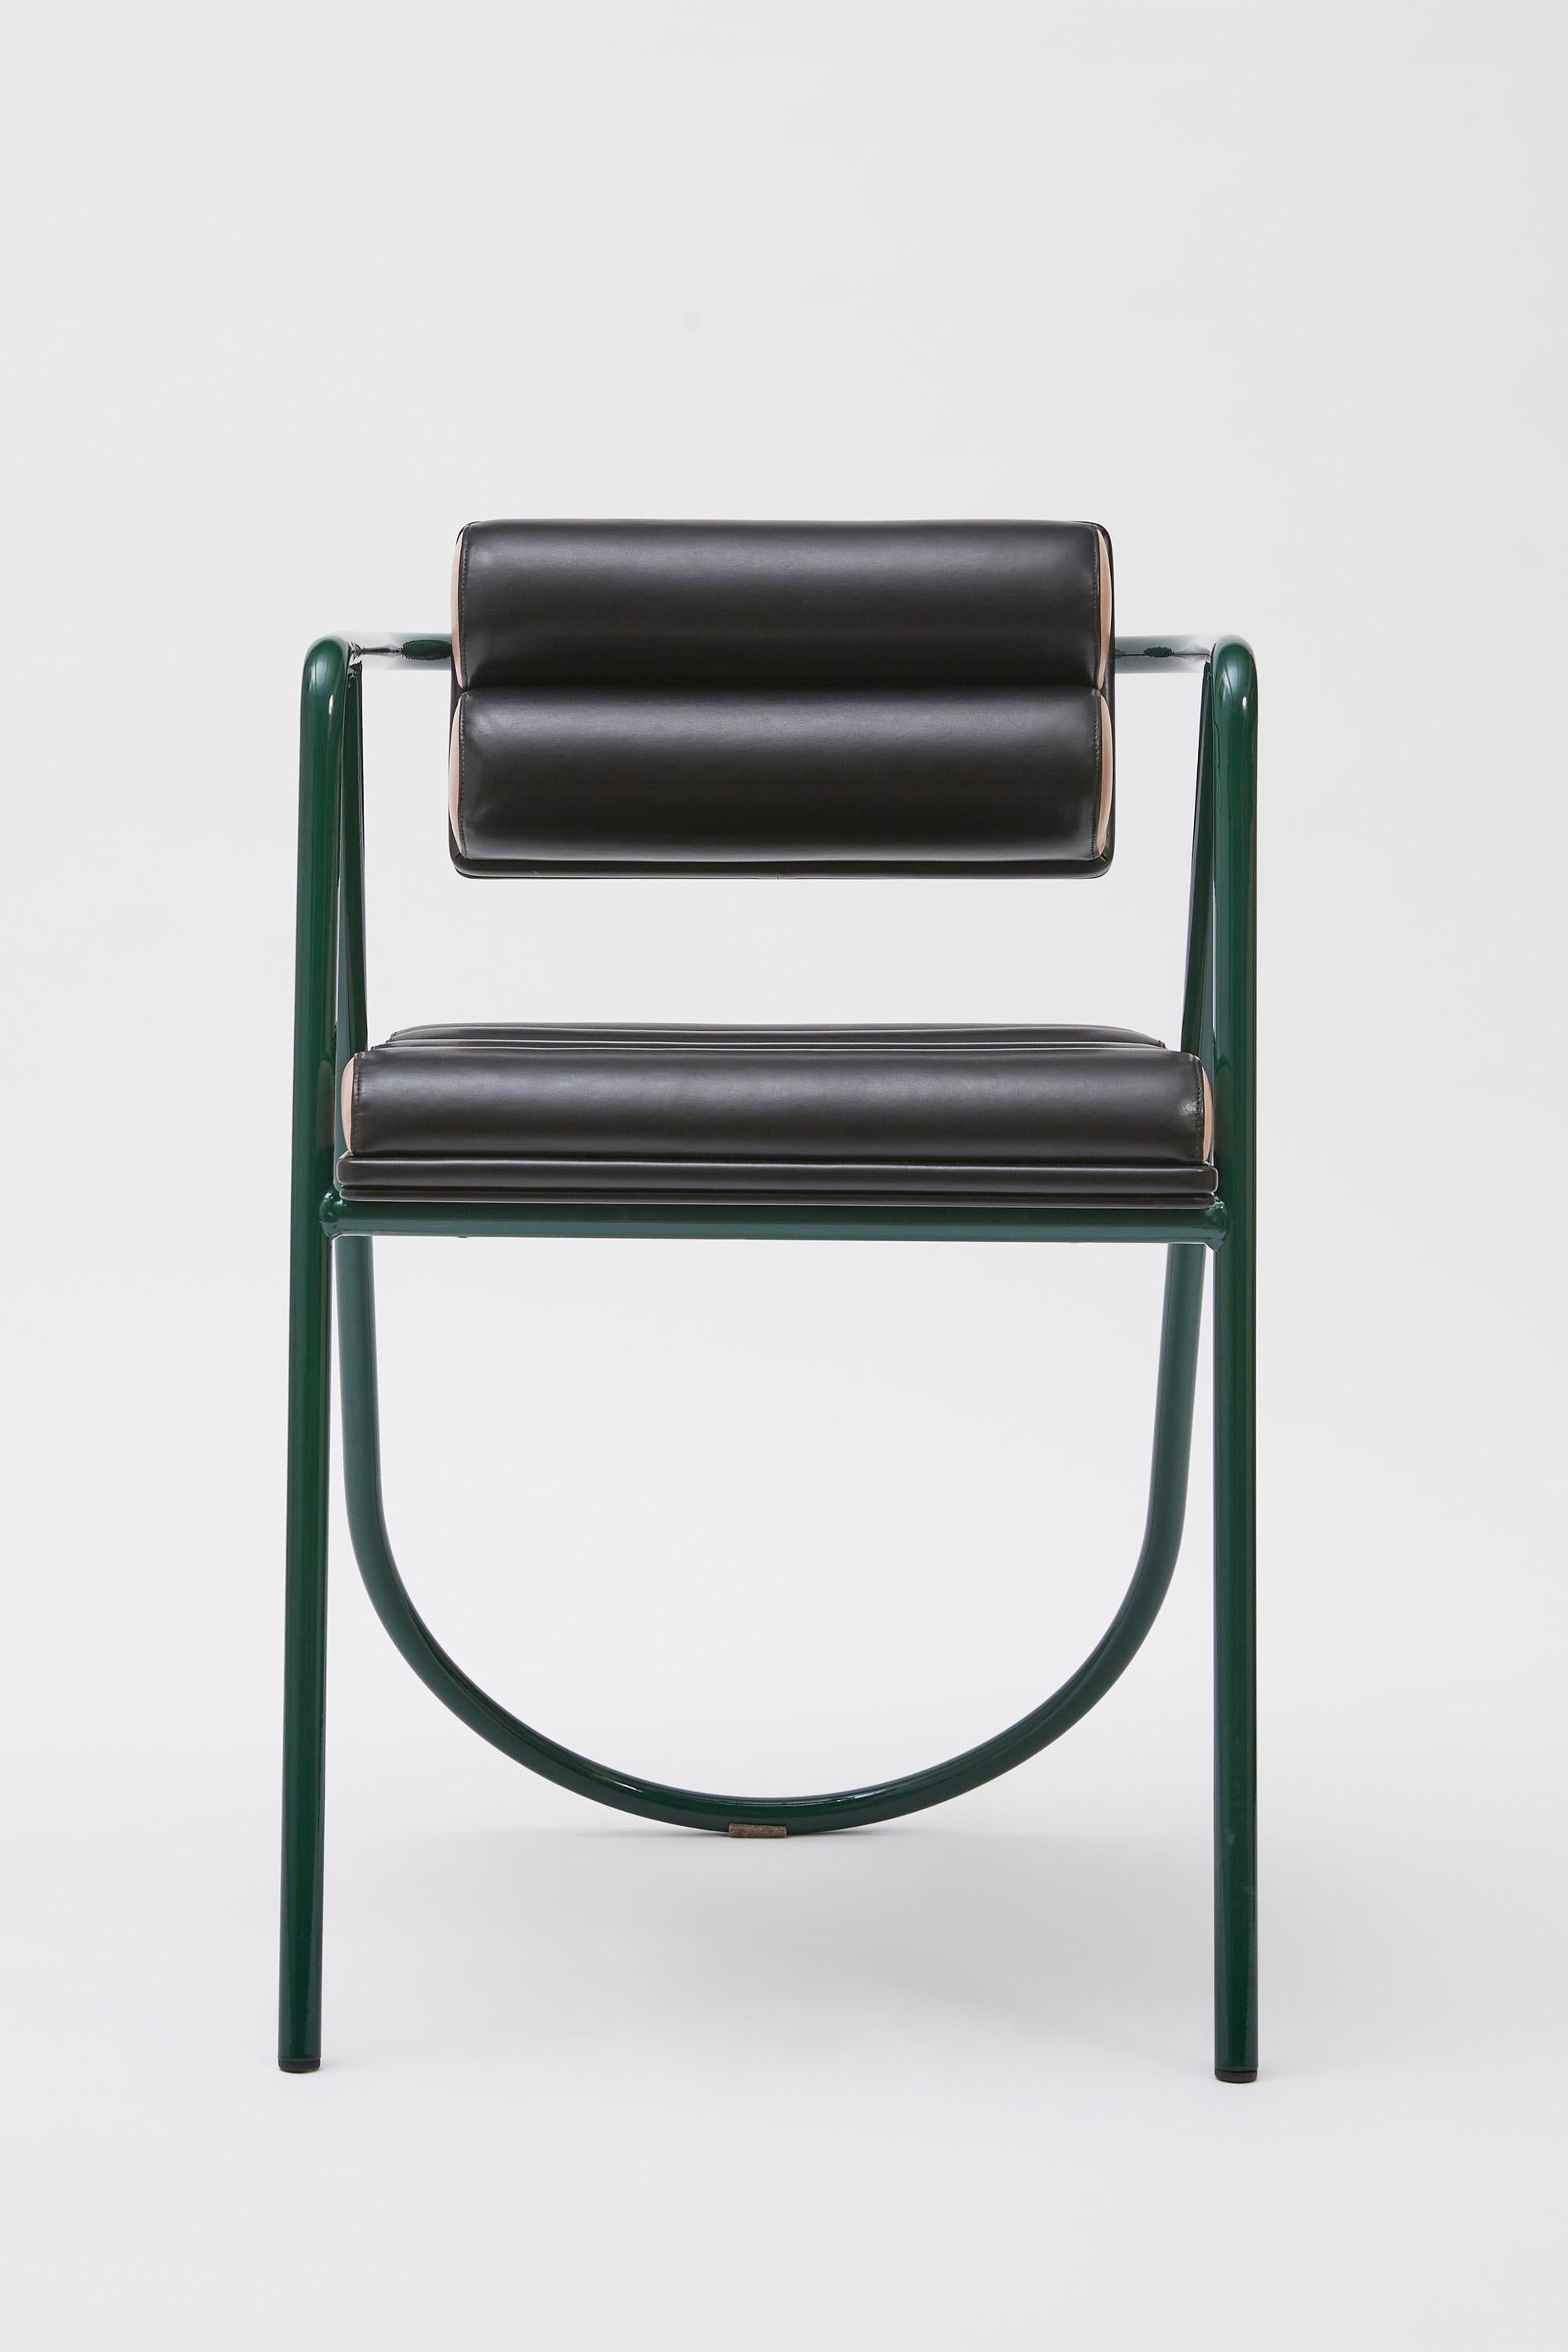 The shapes of La Misciù Chair blend together with the aesthetics of the Spring collection, defining La Misciù Spring Chair. The back and seat, made of synthetic leather, are set on the green-painted steel frame, defining a new connection between the